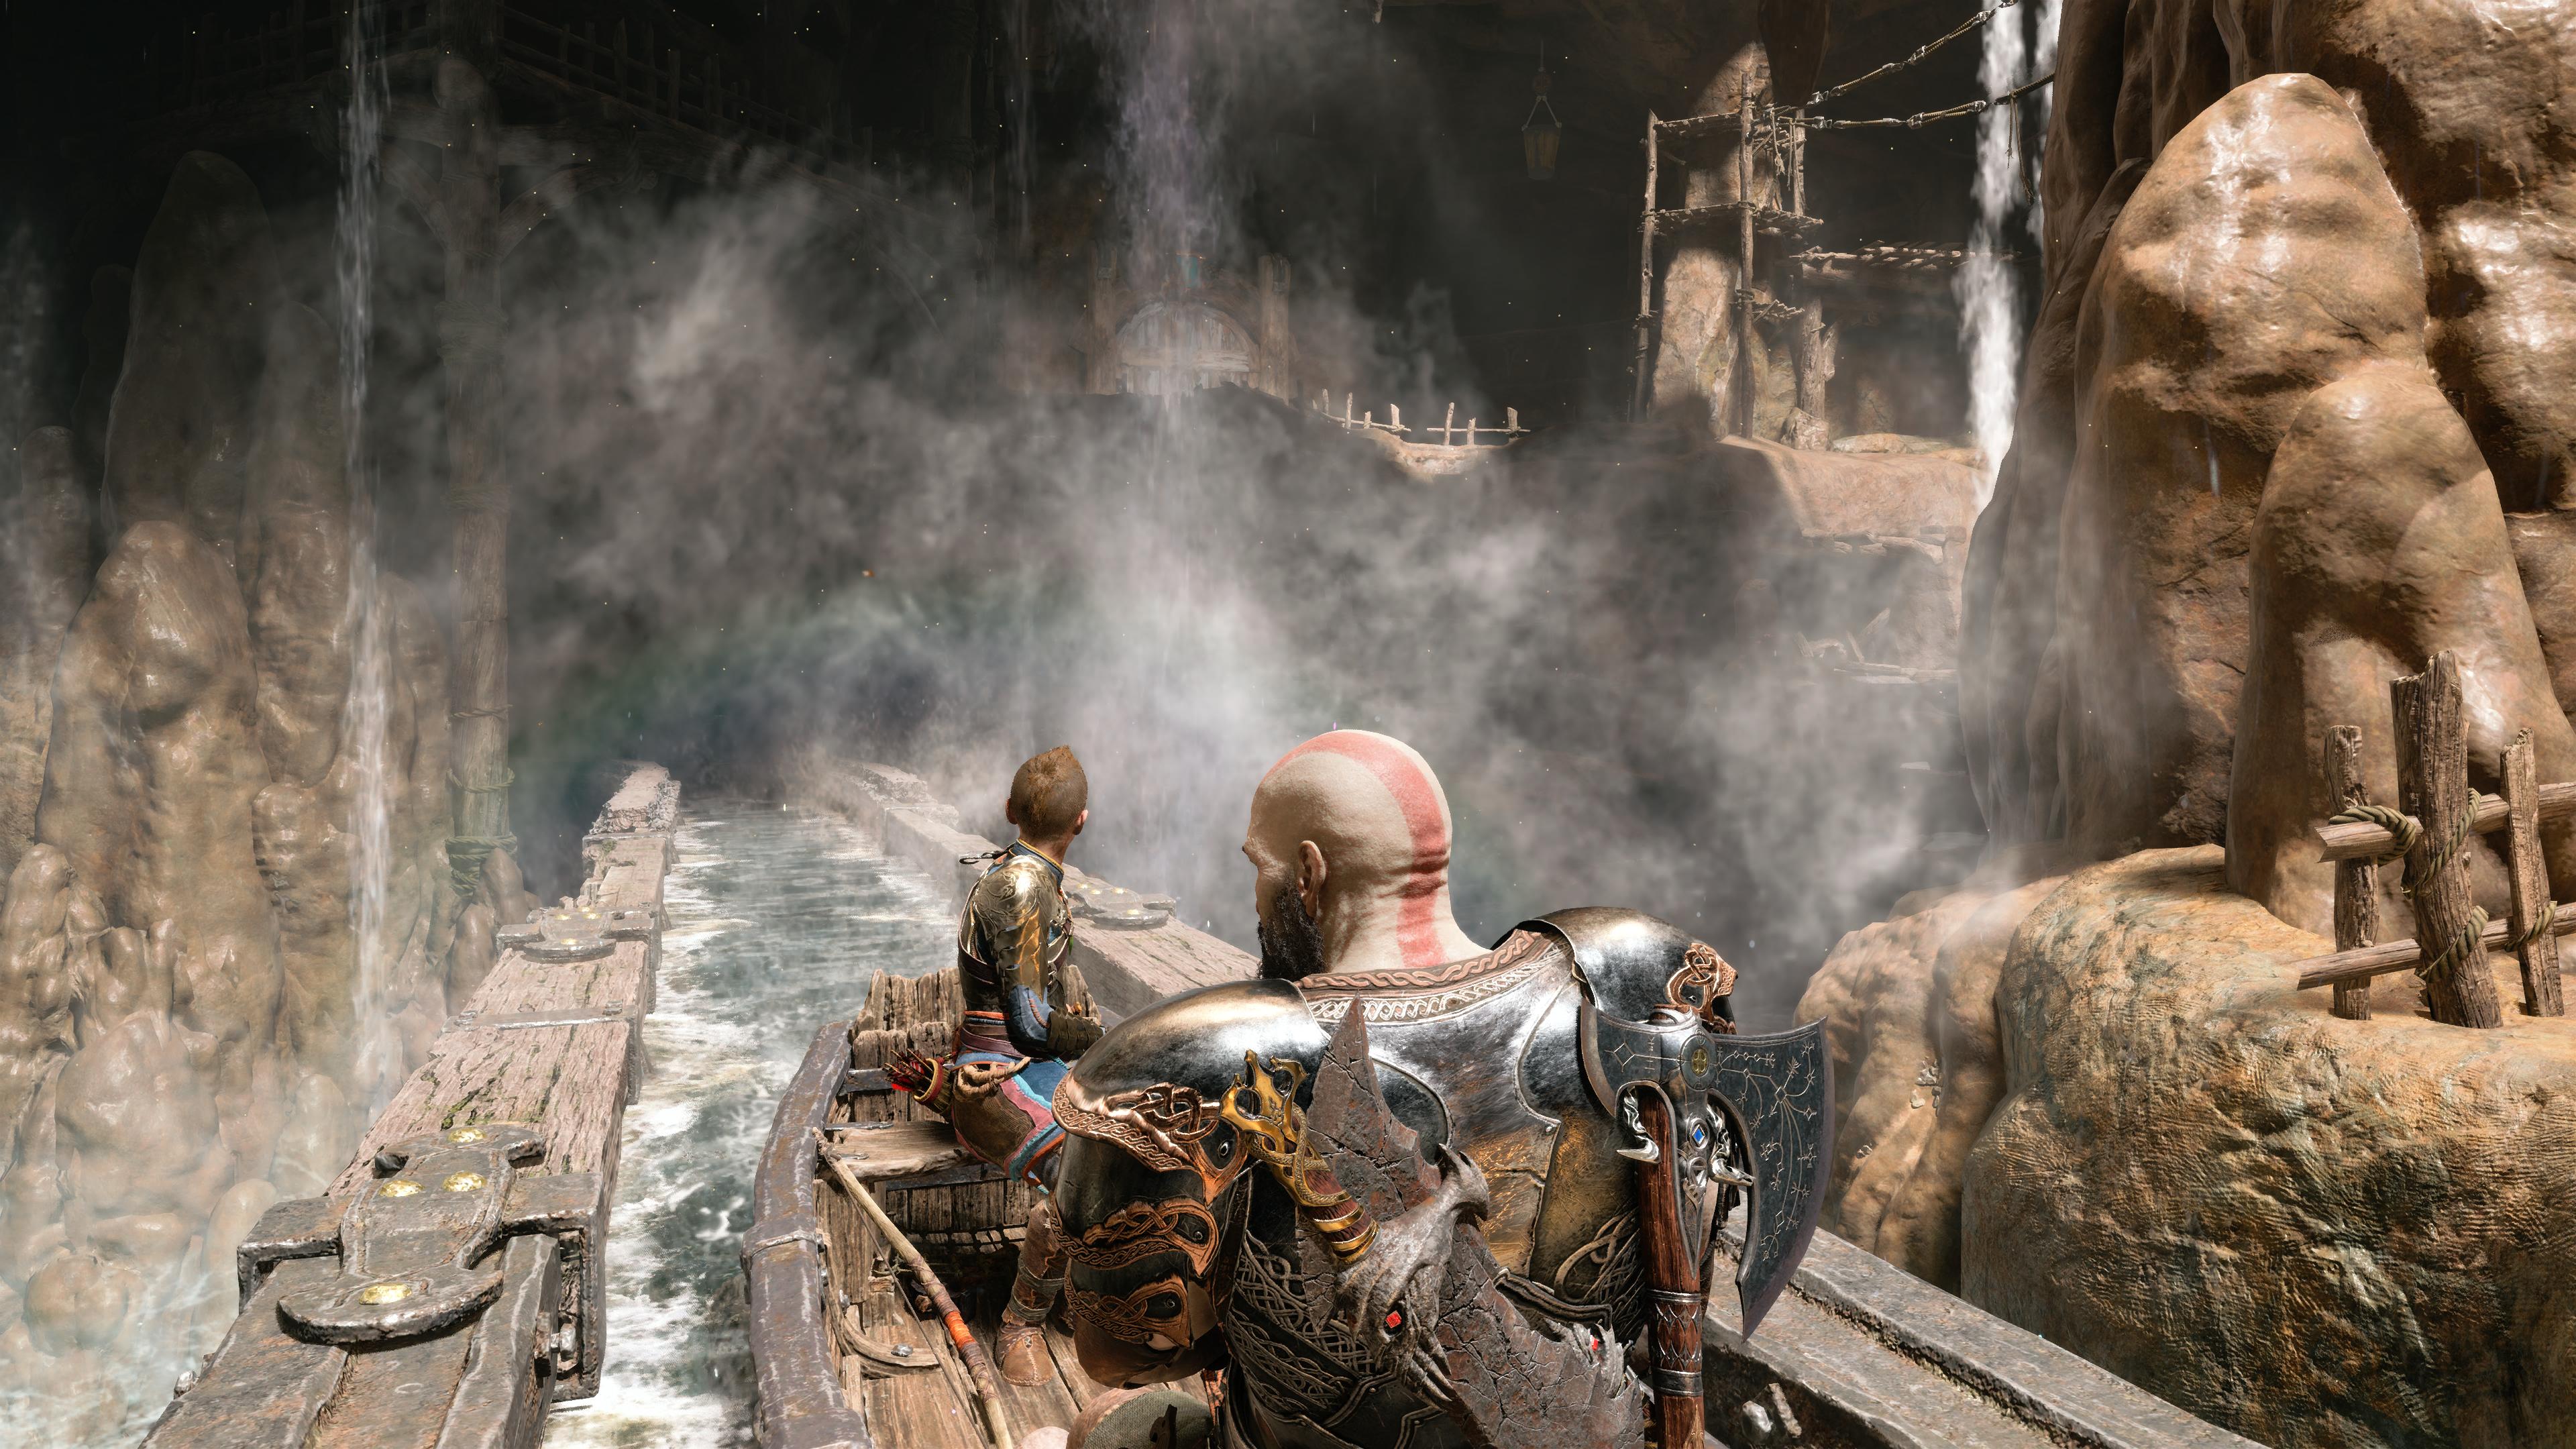 God of War Ragnarok review - Kratos and Atreus ride a log flume-style boat through the mines